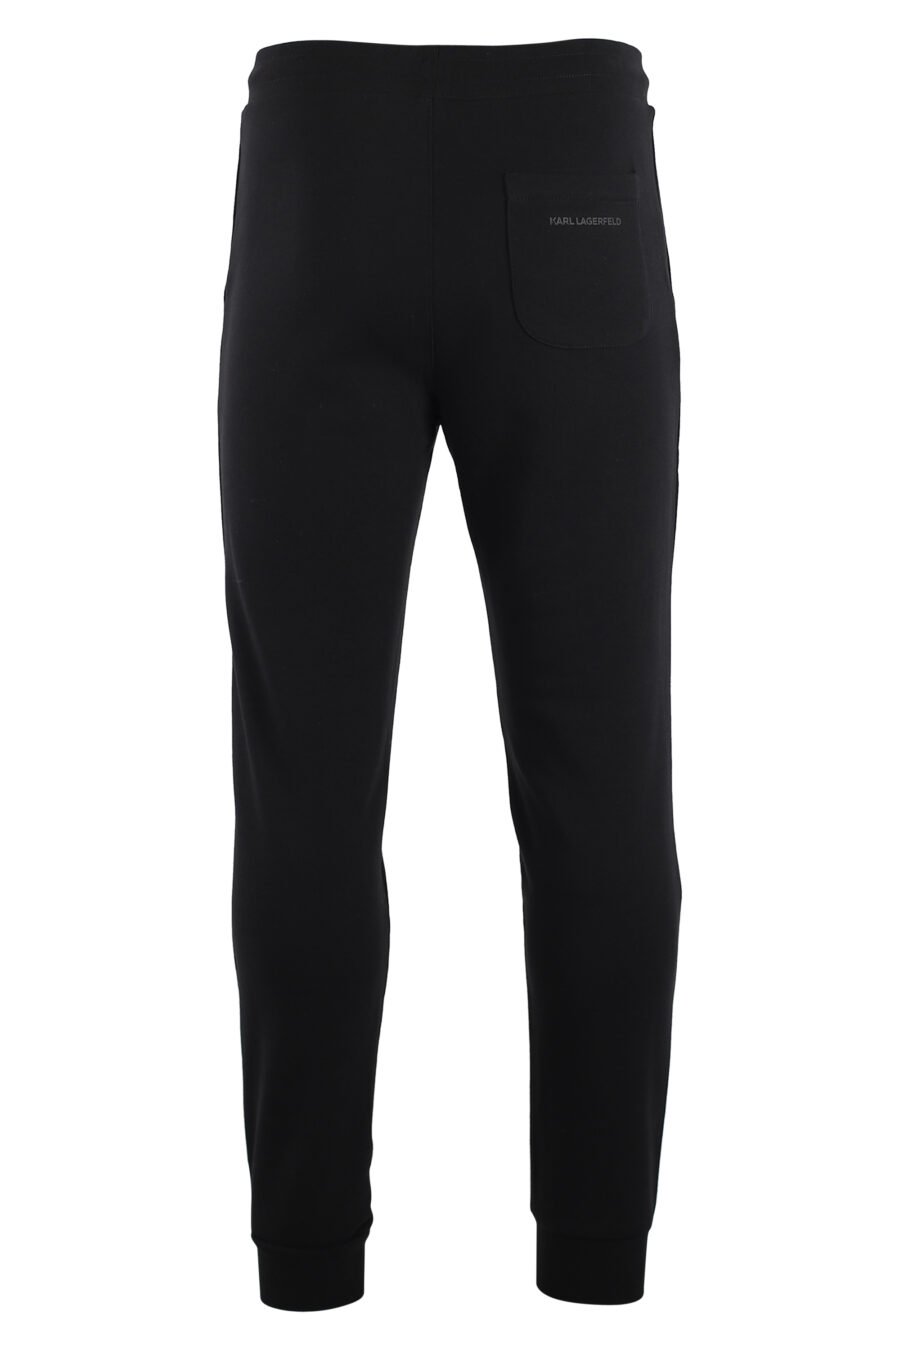 Tracksuit bottoms black with iridescent logo - IMG 7547